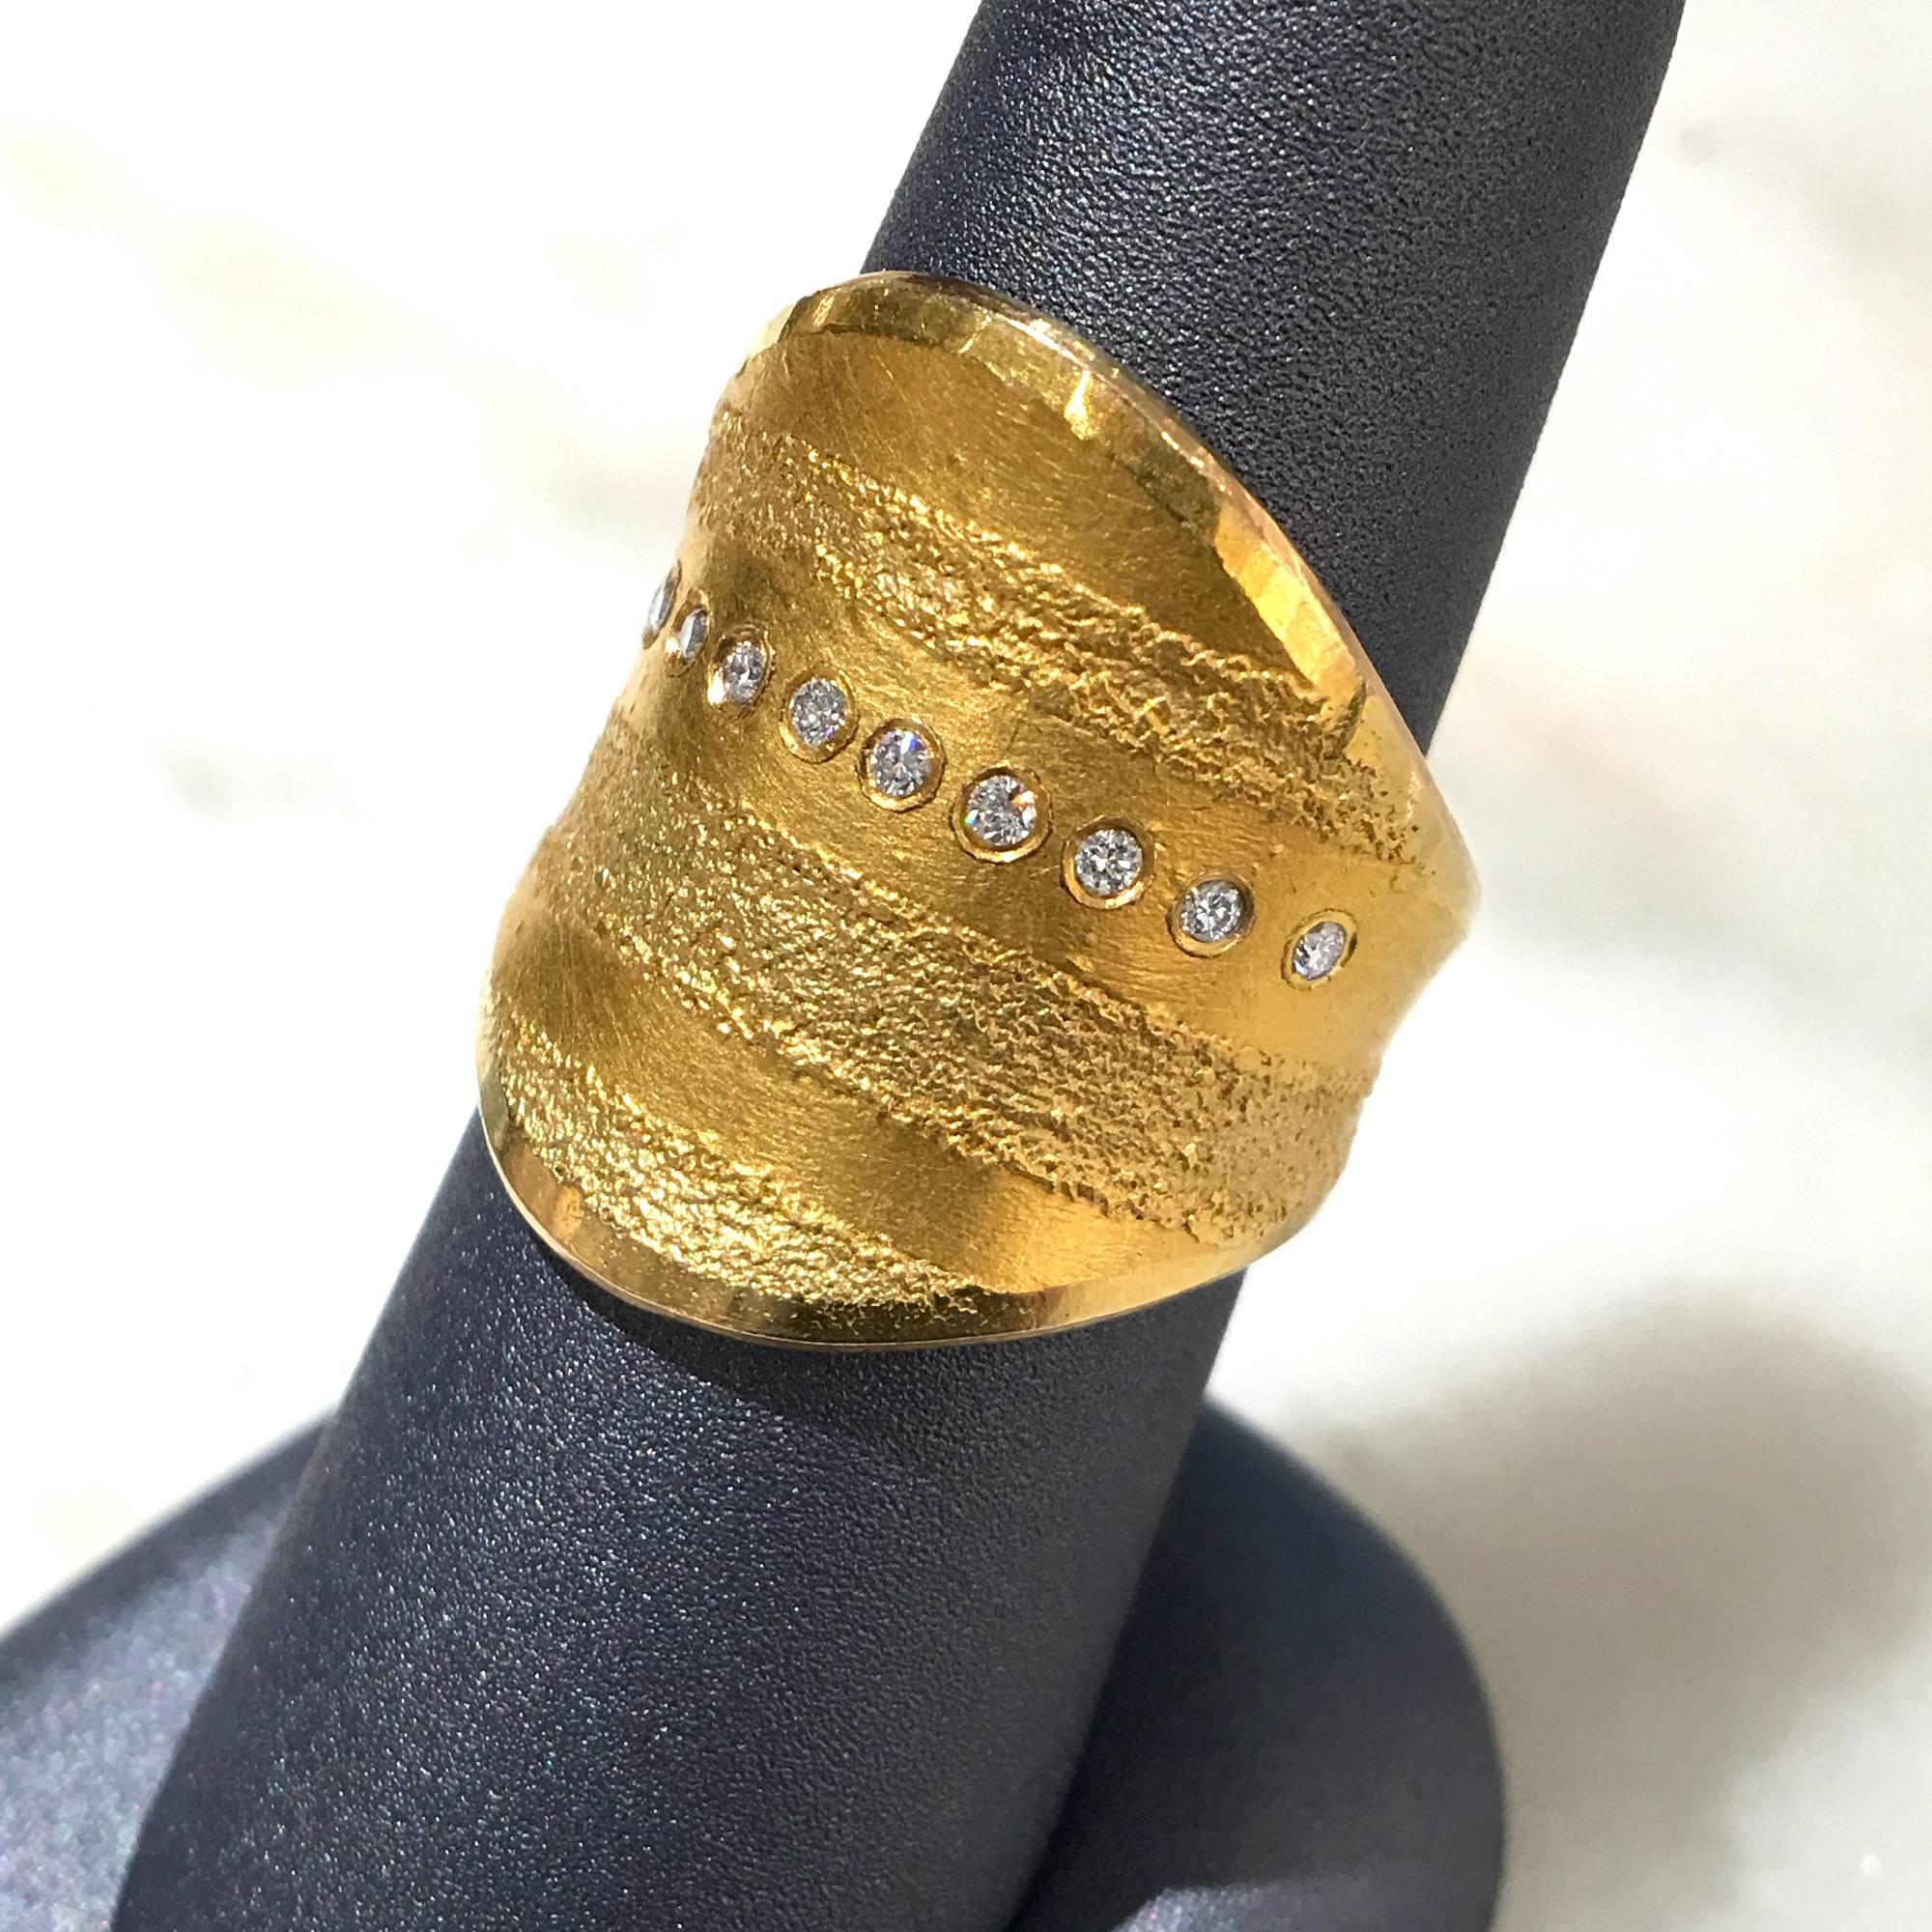 One of a Kind Golden Curve Ring handmade in Germany by award-winning jewelry artist Atelier Zobel (Peter Schmid) in an intricate combination of pure gold and 18k yellow gold featuring round brilliant-cut diamonds totaling 0.10 carats. Size 8.0 (can